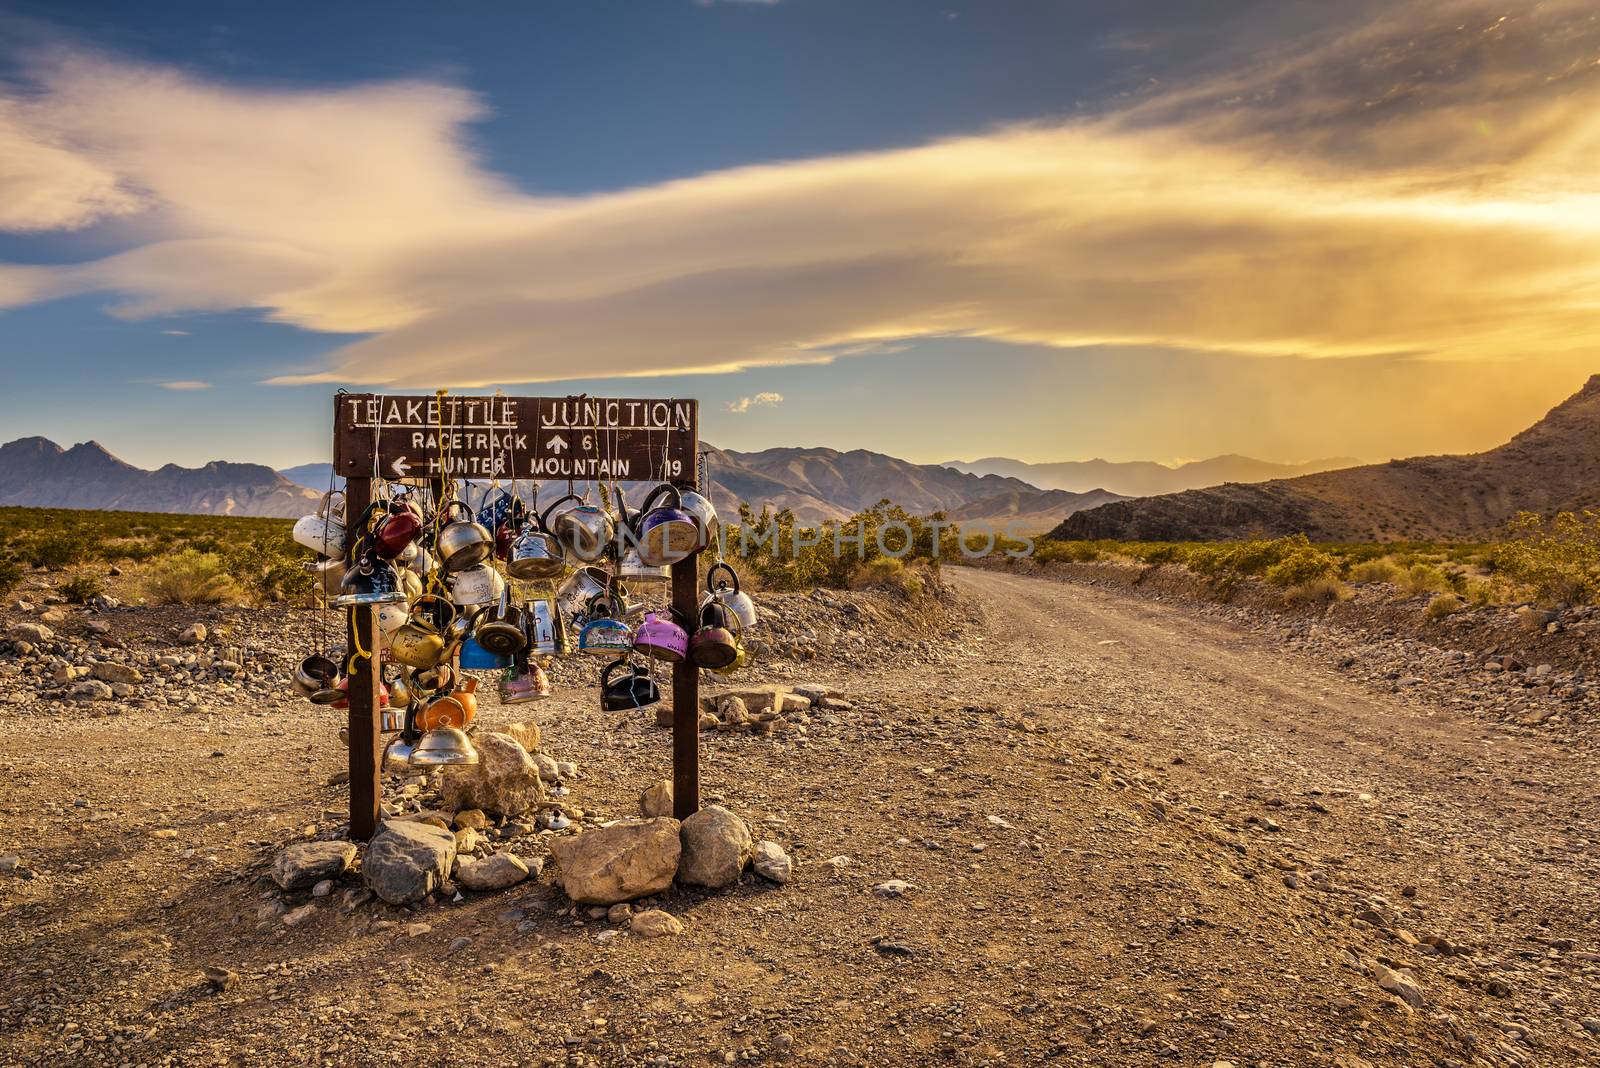 Teakettle Junction in Death Valley National Park, California by nickfox